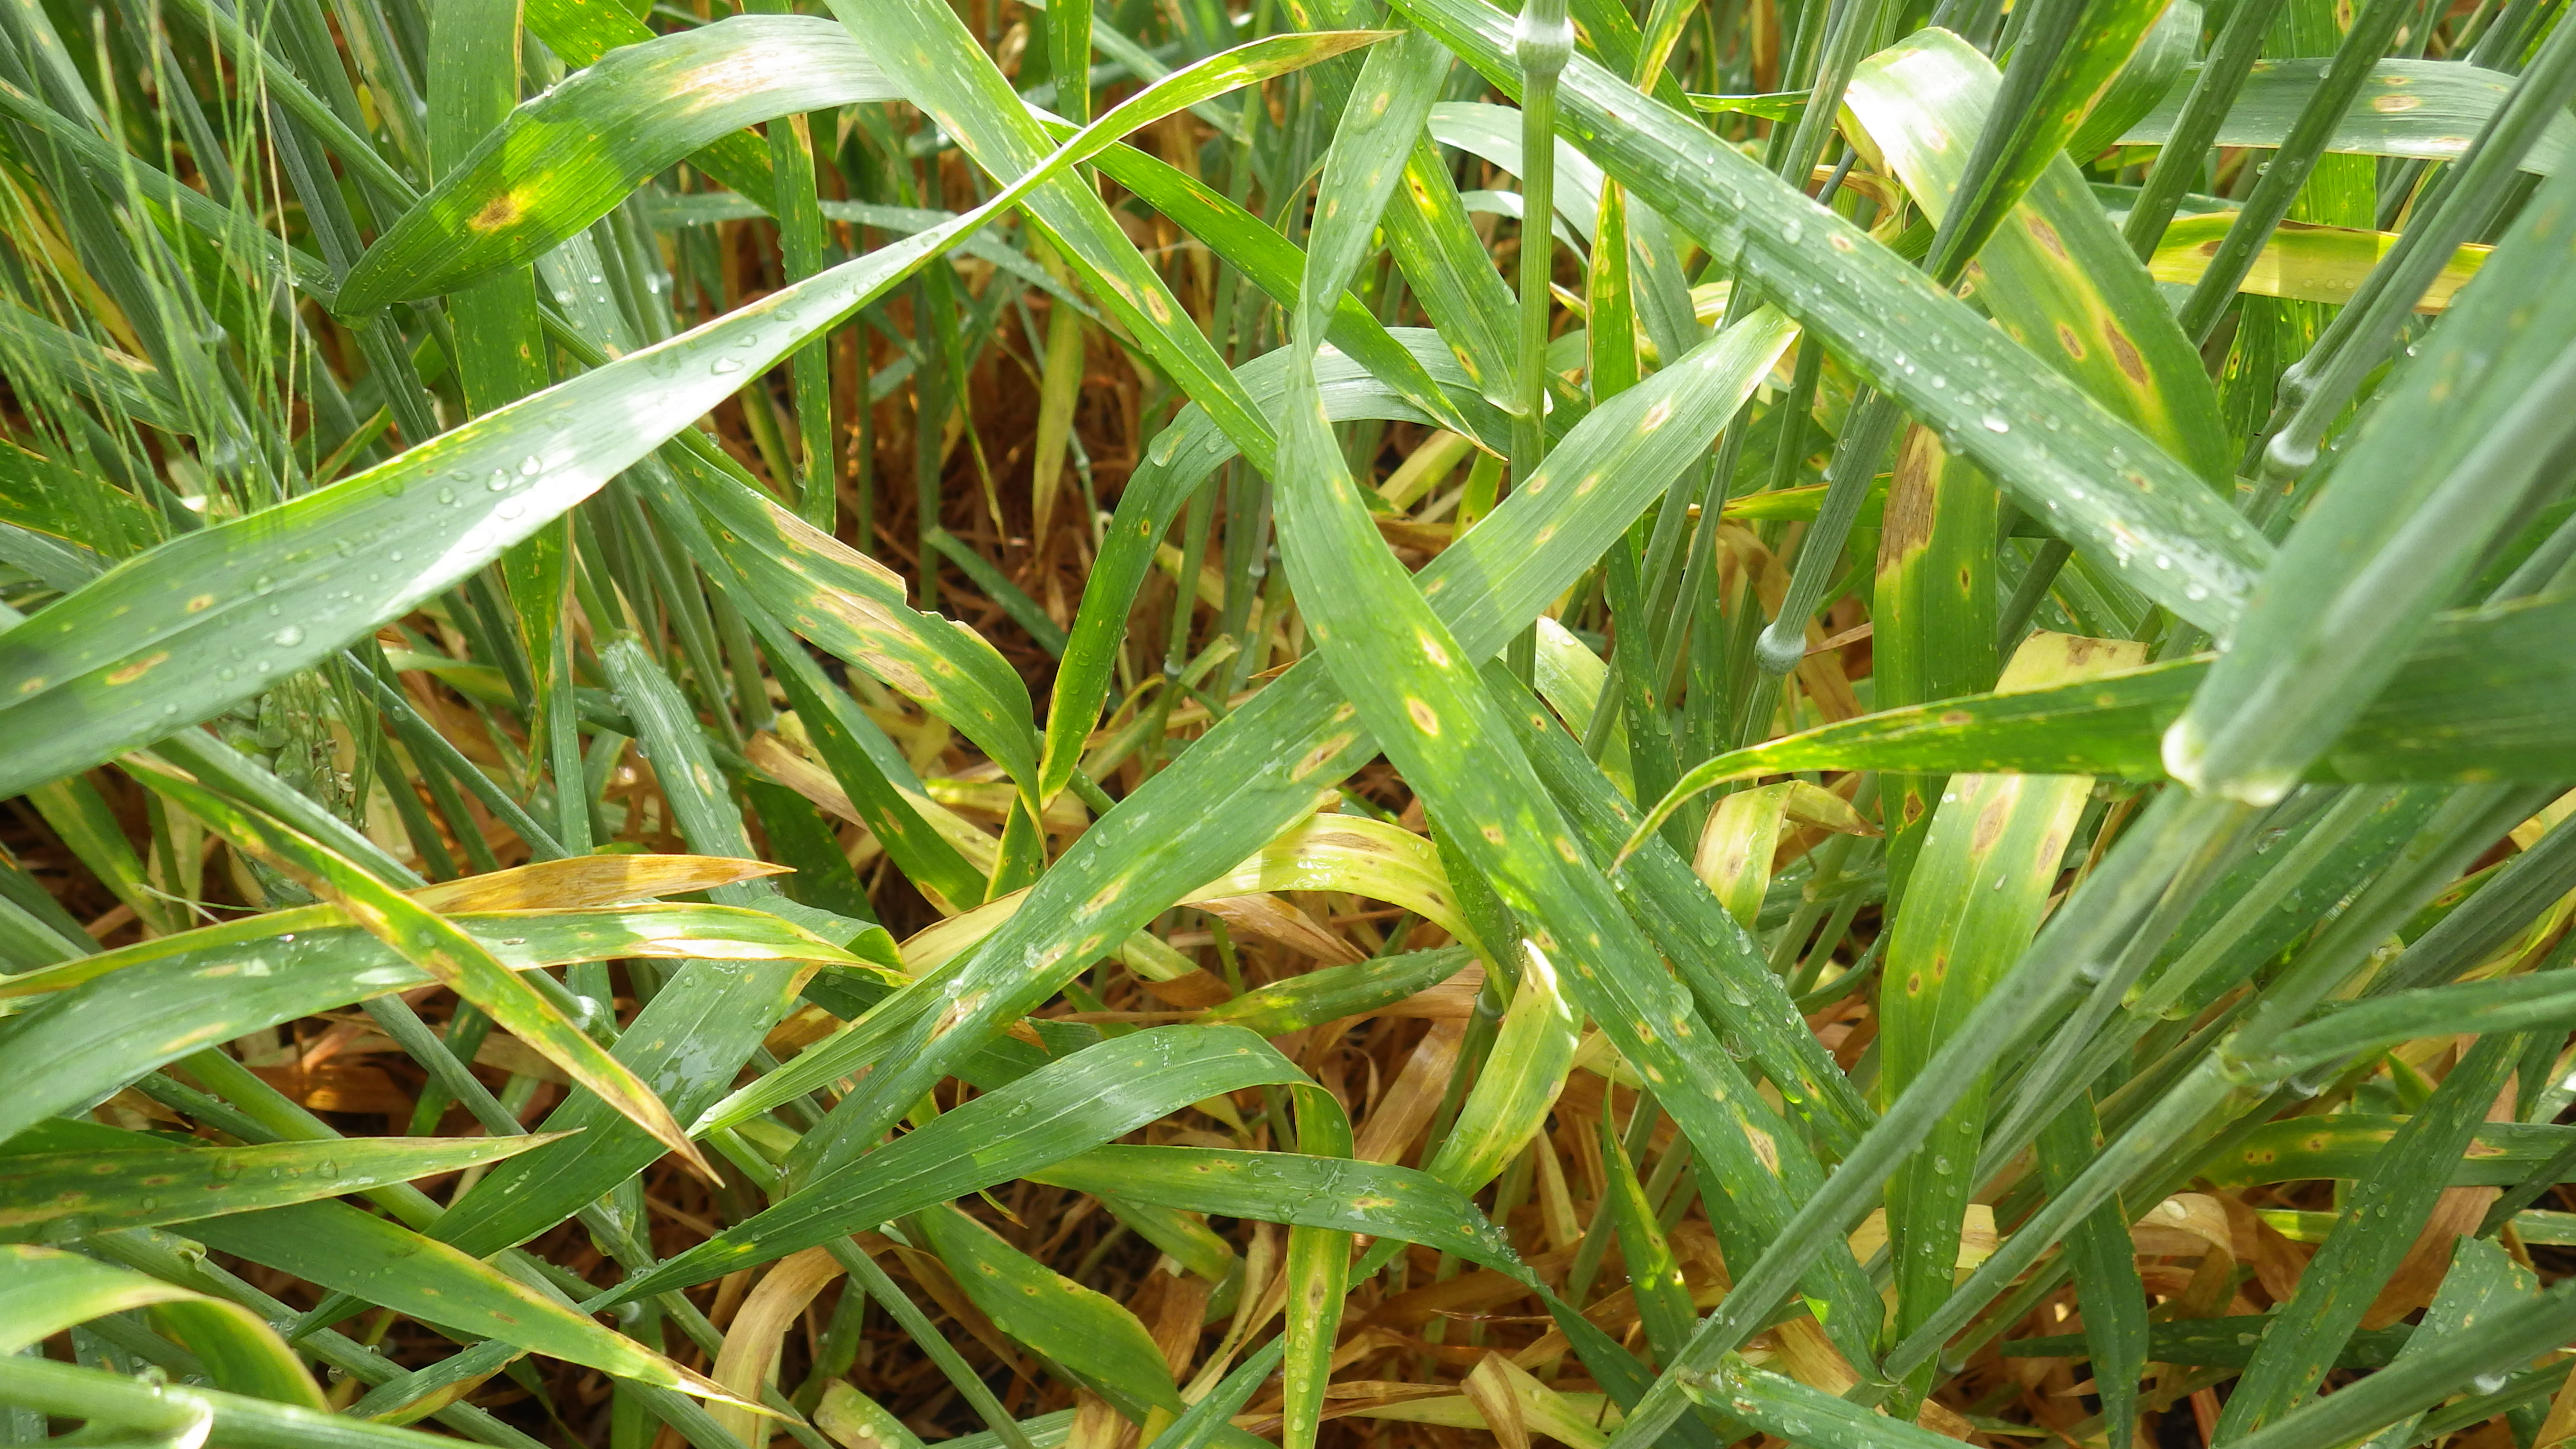 Infection can occur anytime during the growing season .